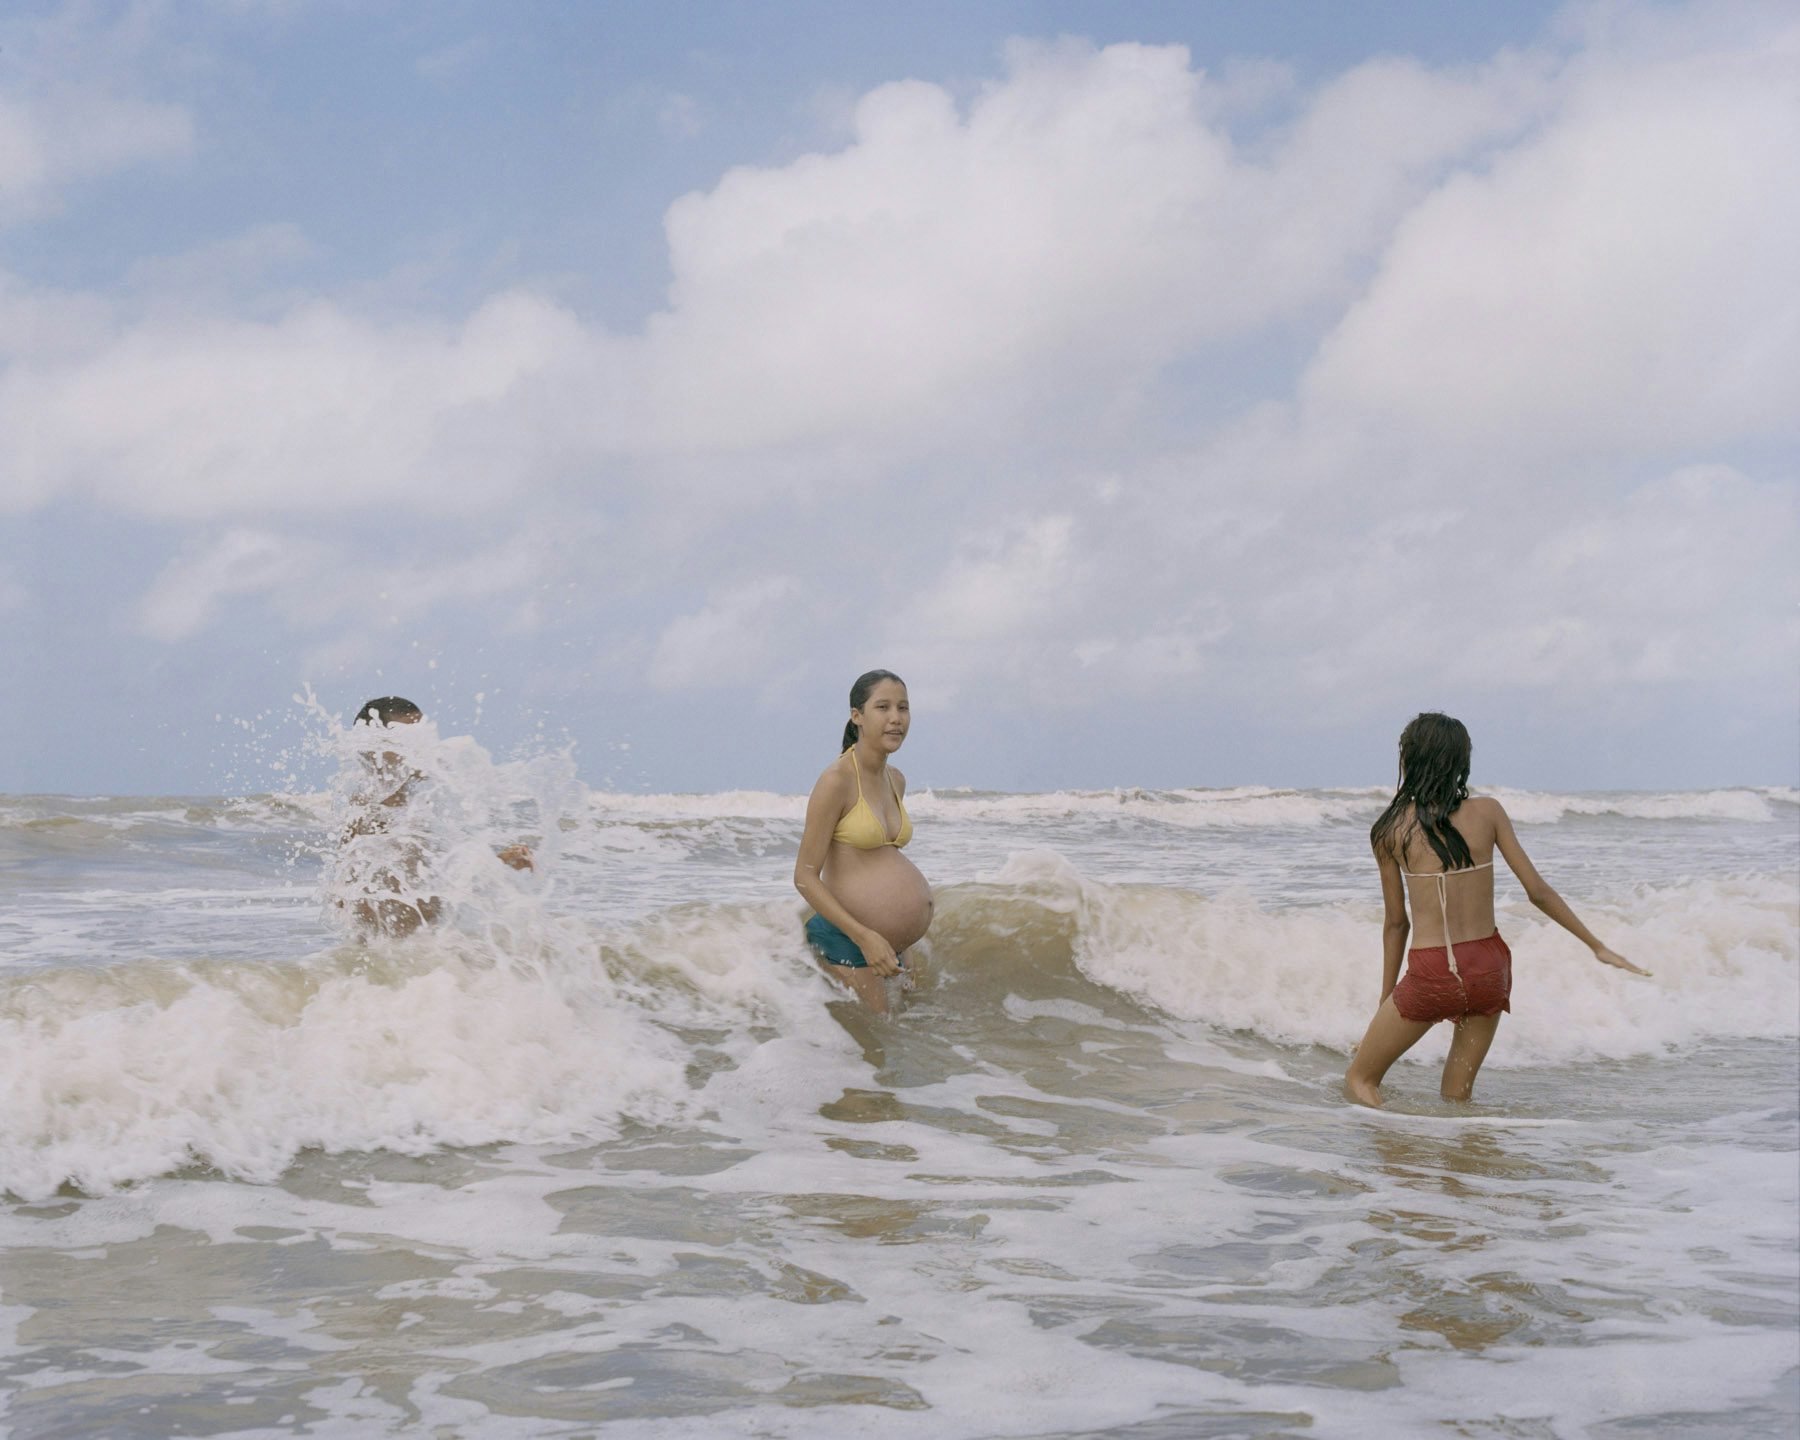 Image by Silvana Trevale of three people playing in the sea, one of them pregnant